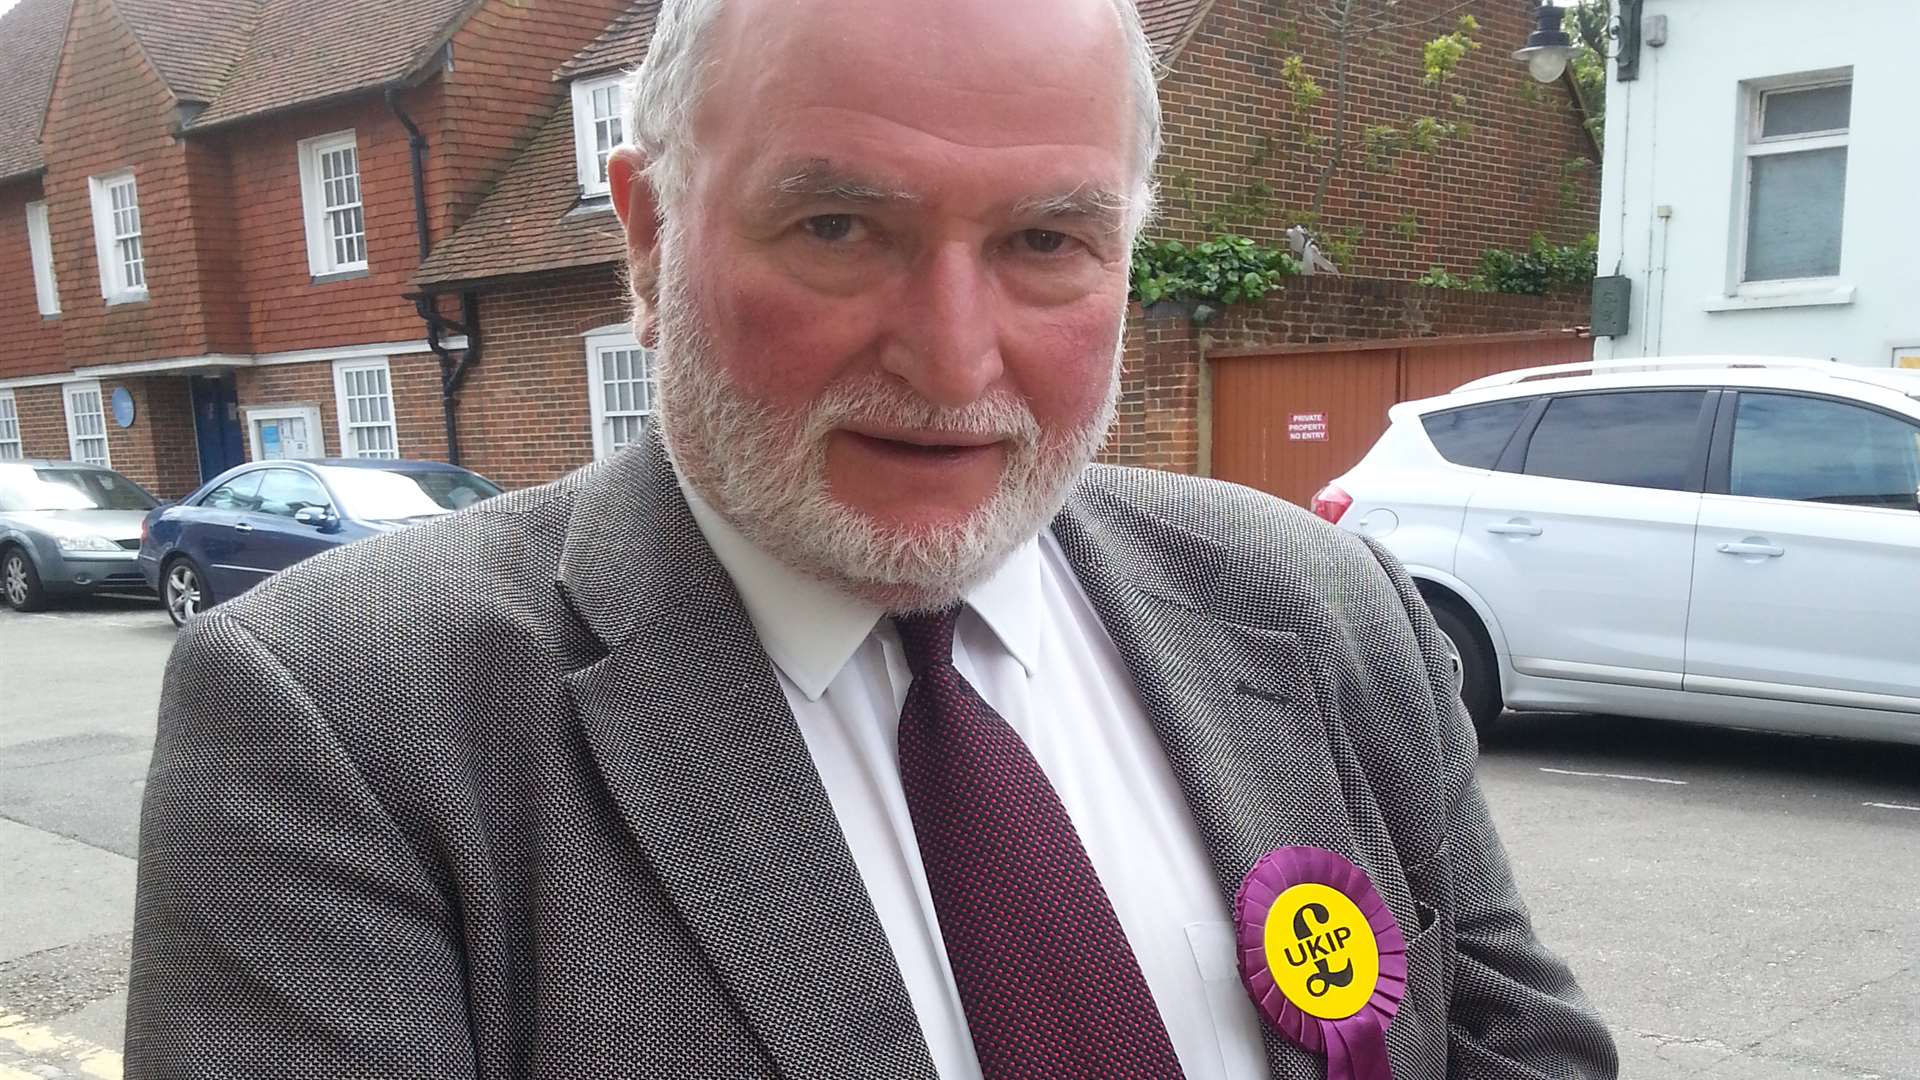 Ukip's David Hirst outside the count.